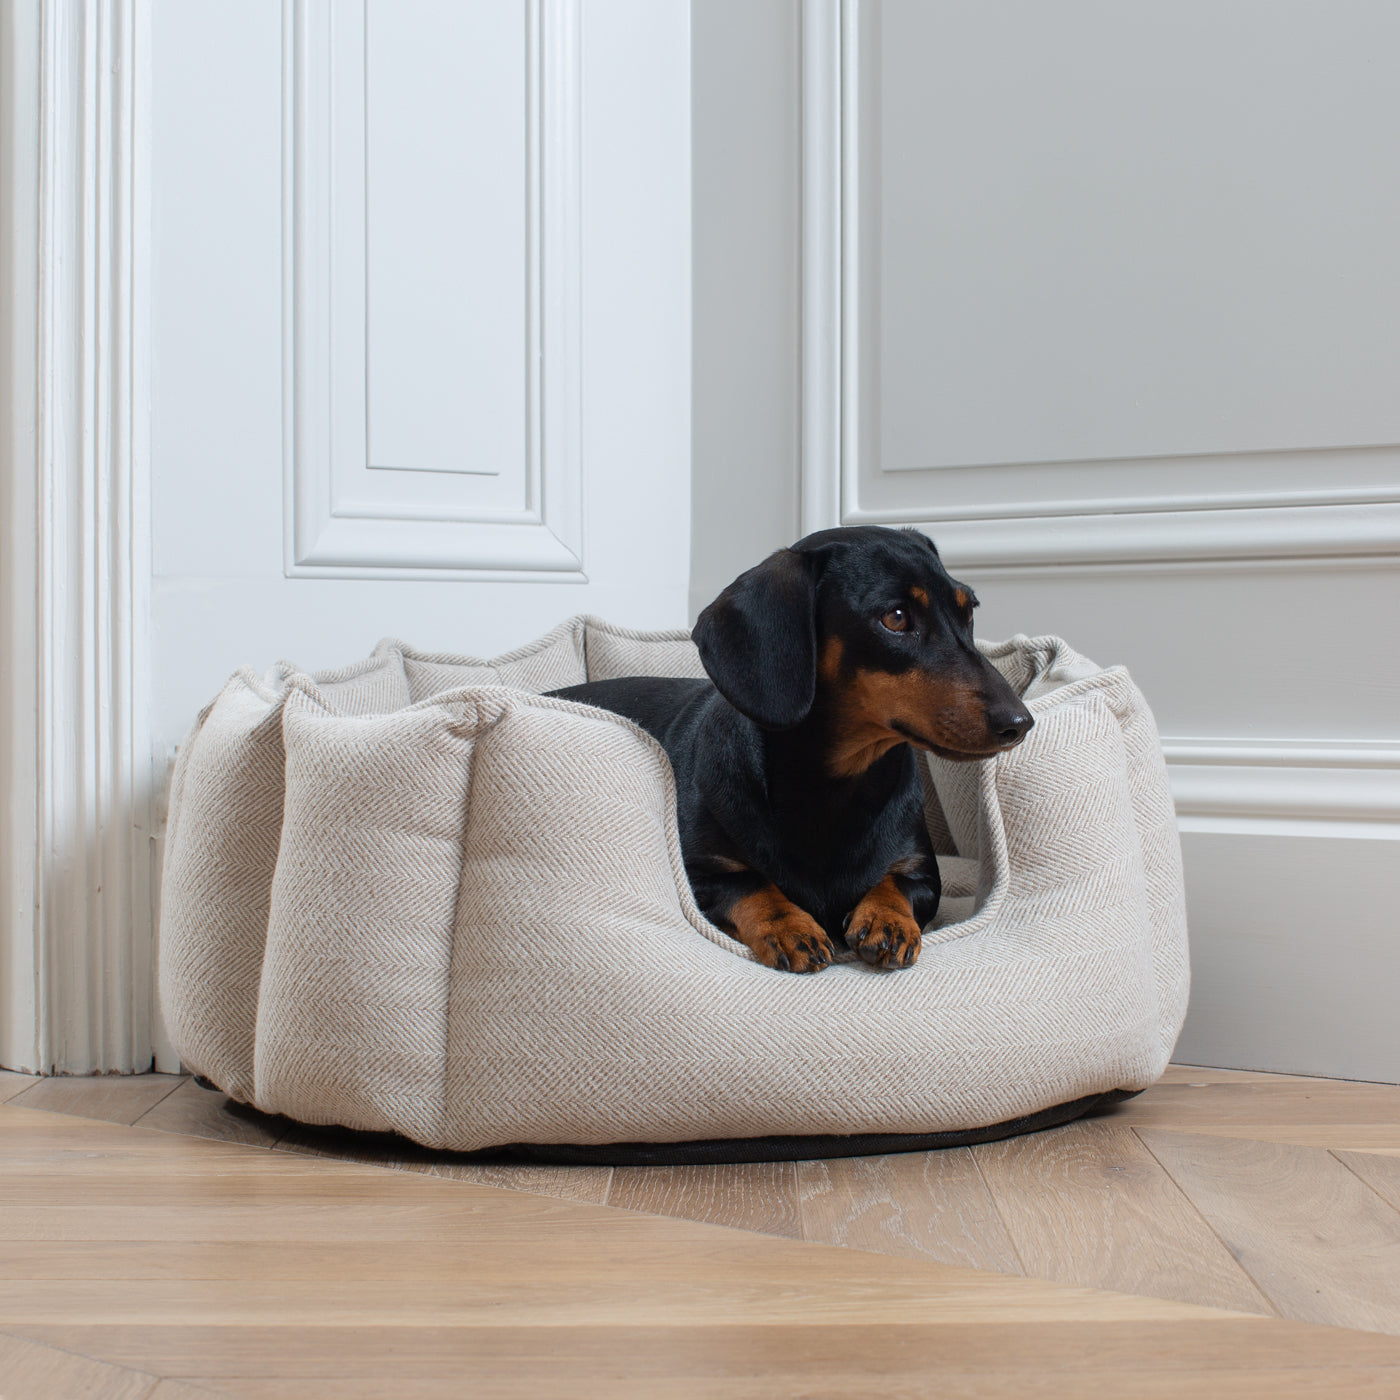 Discover Our Luxurious High Wall Bed For Dogs, Featuring inner pillow with plush teddy fleece on one side To Craft The Perfect Dogs Bed In Stunning Natural Herringbone Tweed! Available To Personalise Now at Lords & Labradors 